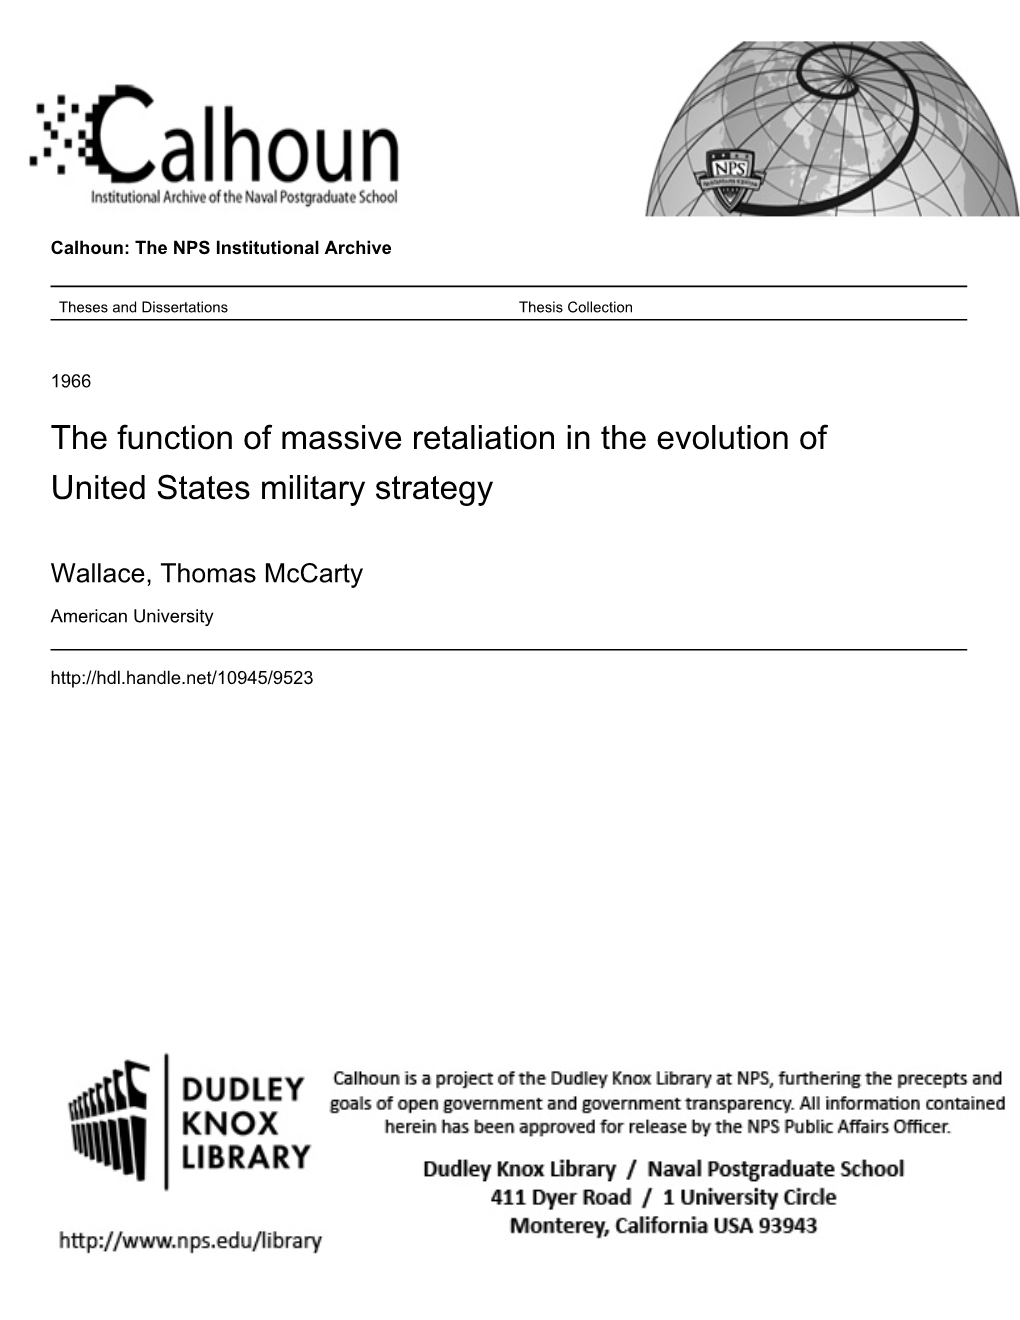 The Function of Massive Retaliation in the Evolution of United States Military Strategy